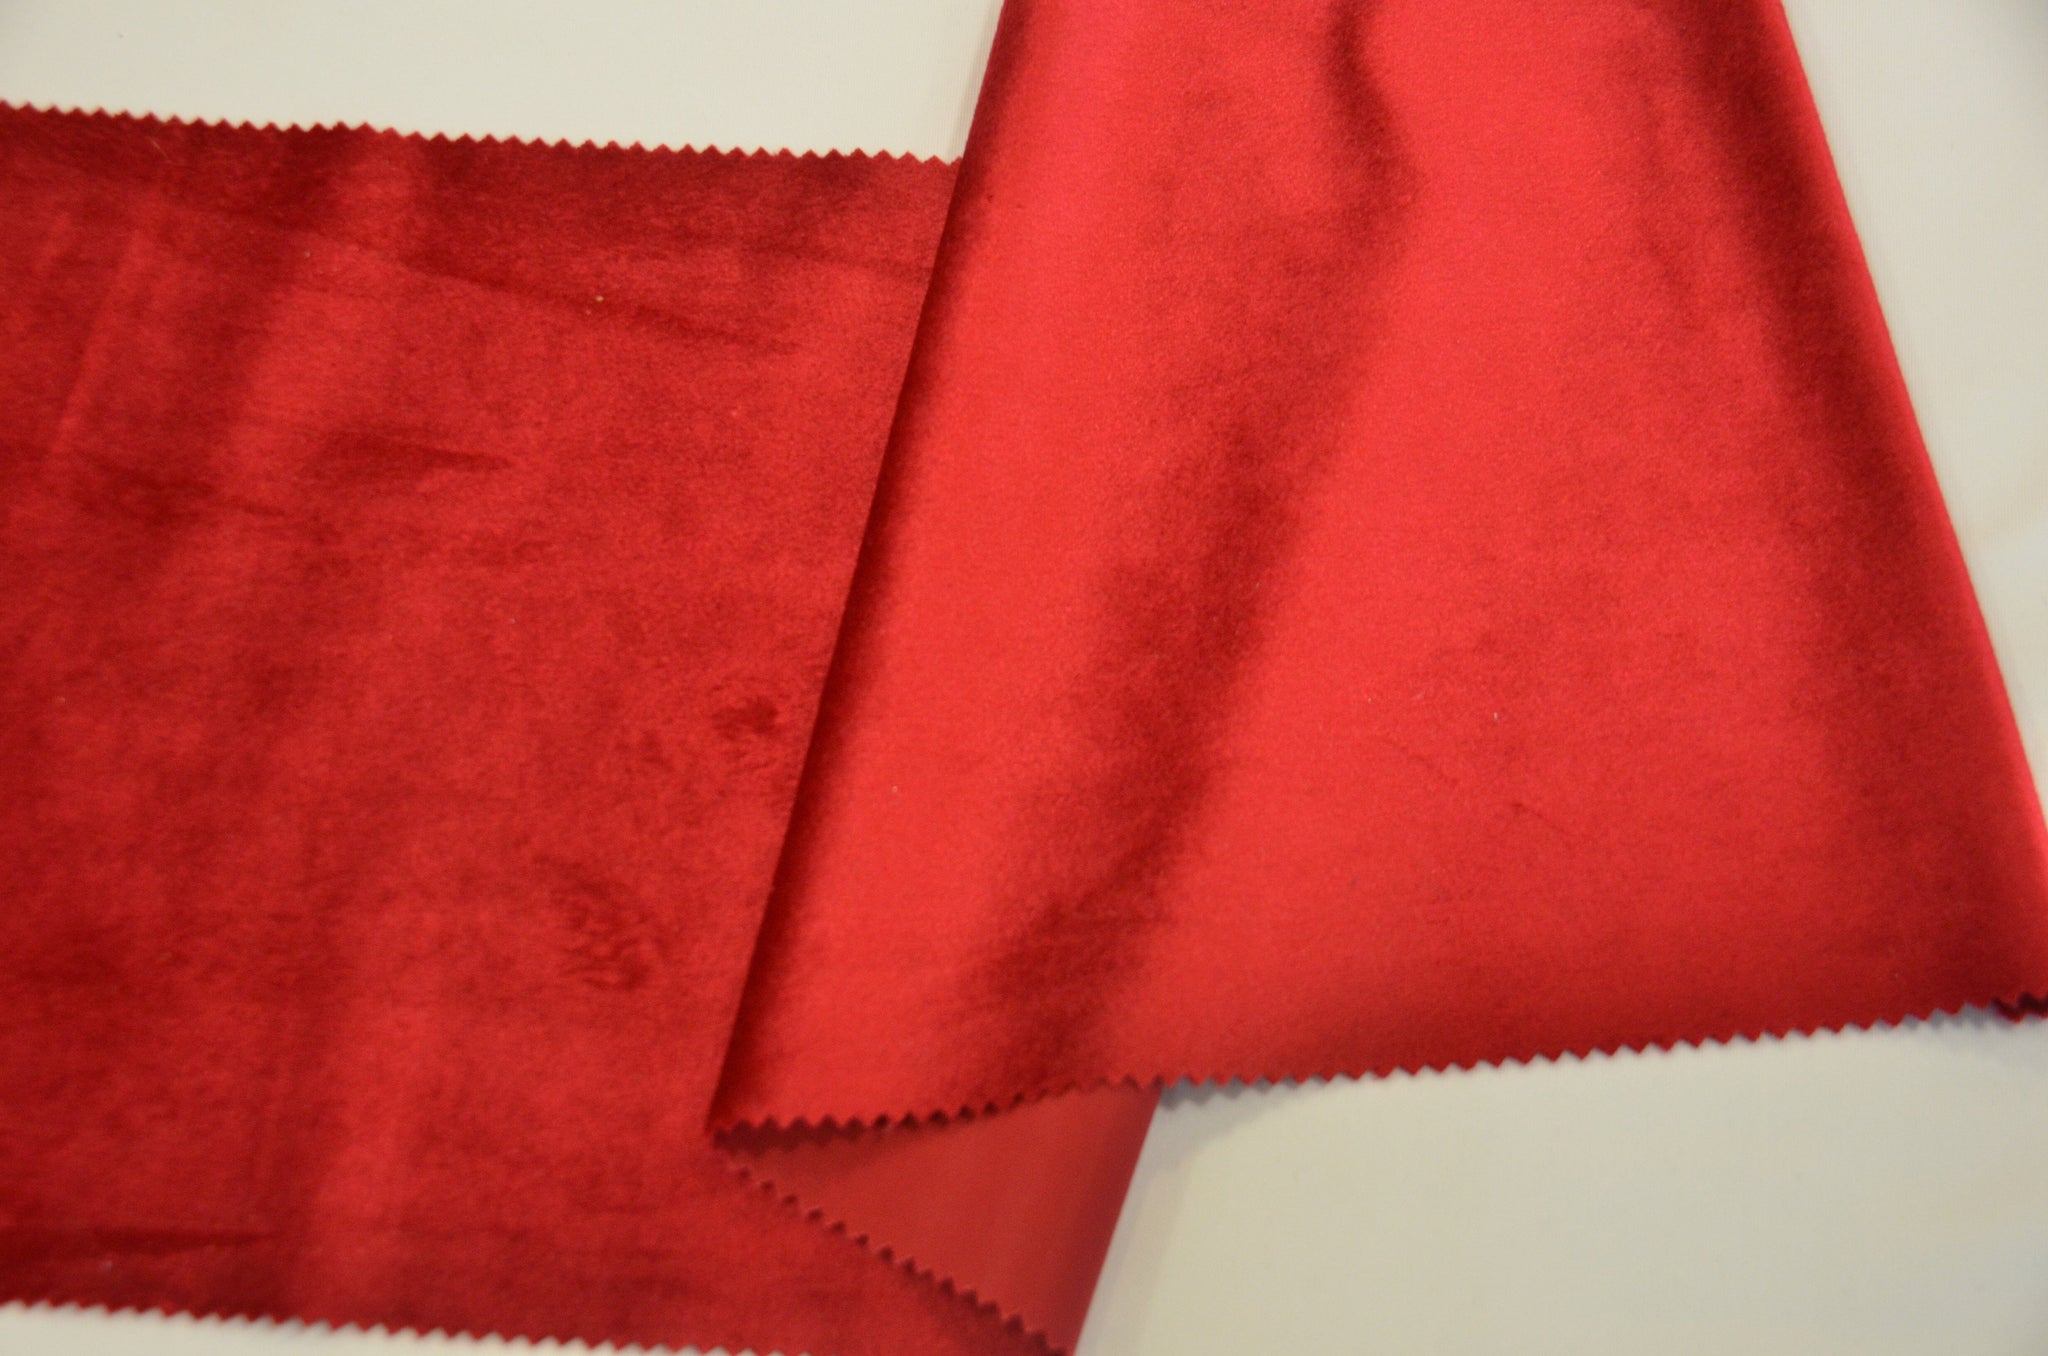 Stretch velvet 60 wide Beautiful fusia pink color Fabric sold by